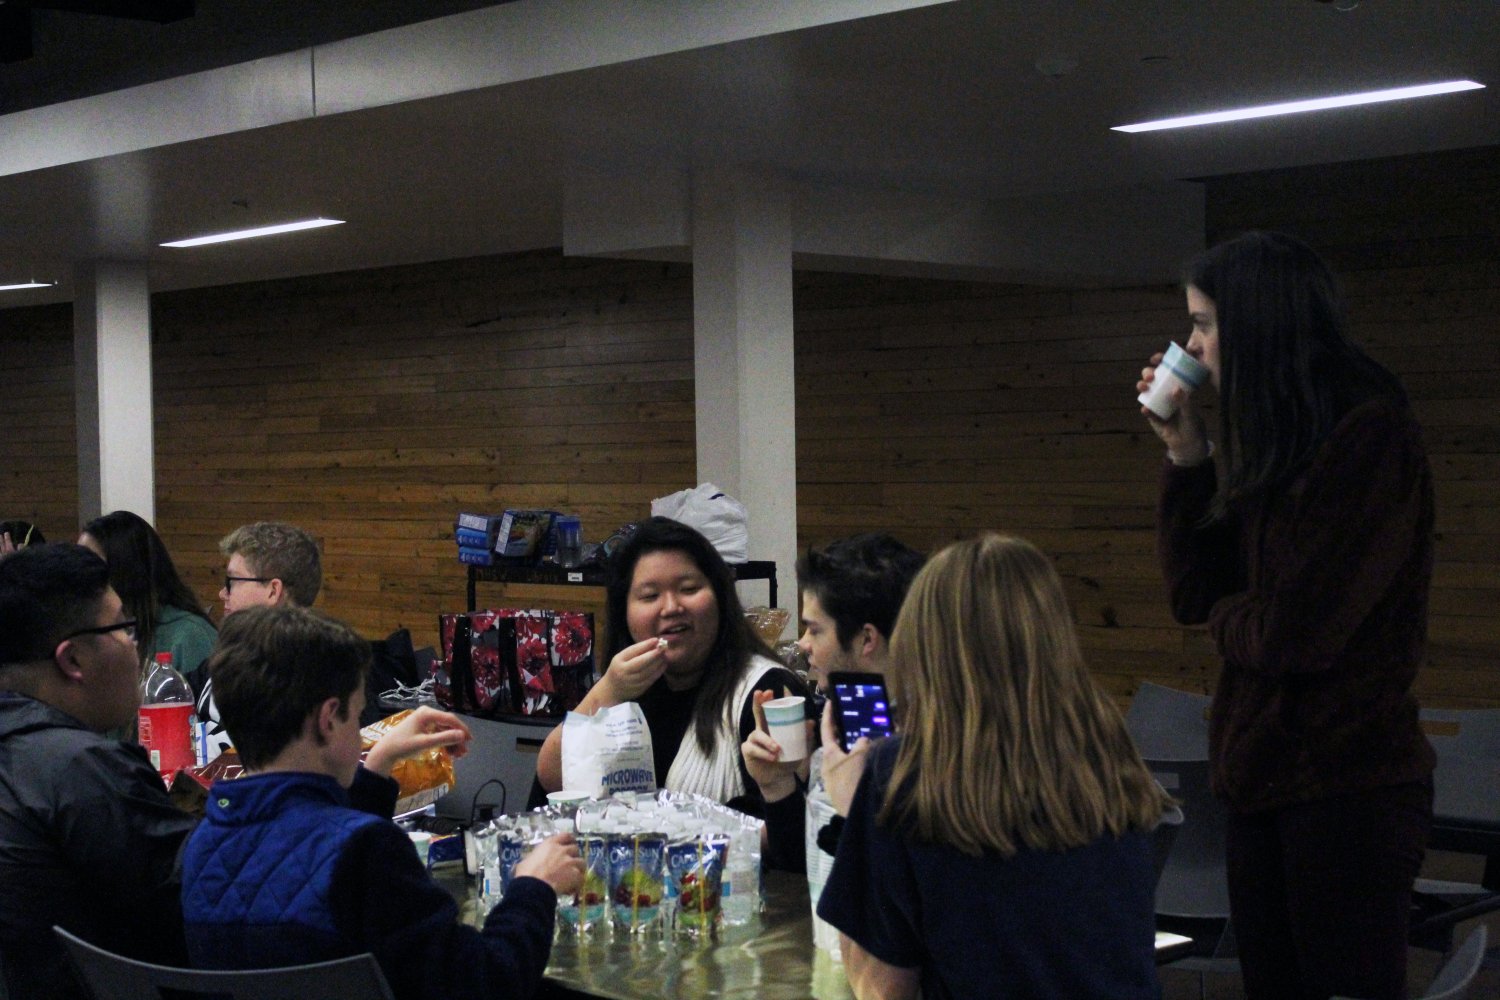 Senior Elizabeth Kim and StuCo club president Will Banister joke with eachother as they enjoy their food at the StuCo club feast.
Photo by Kyla Barnett